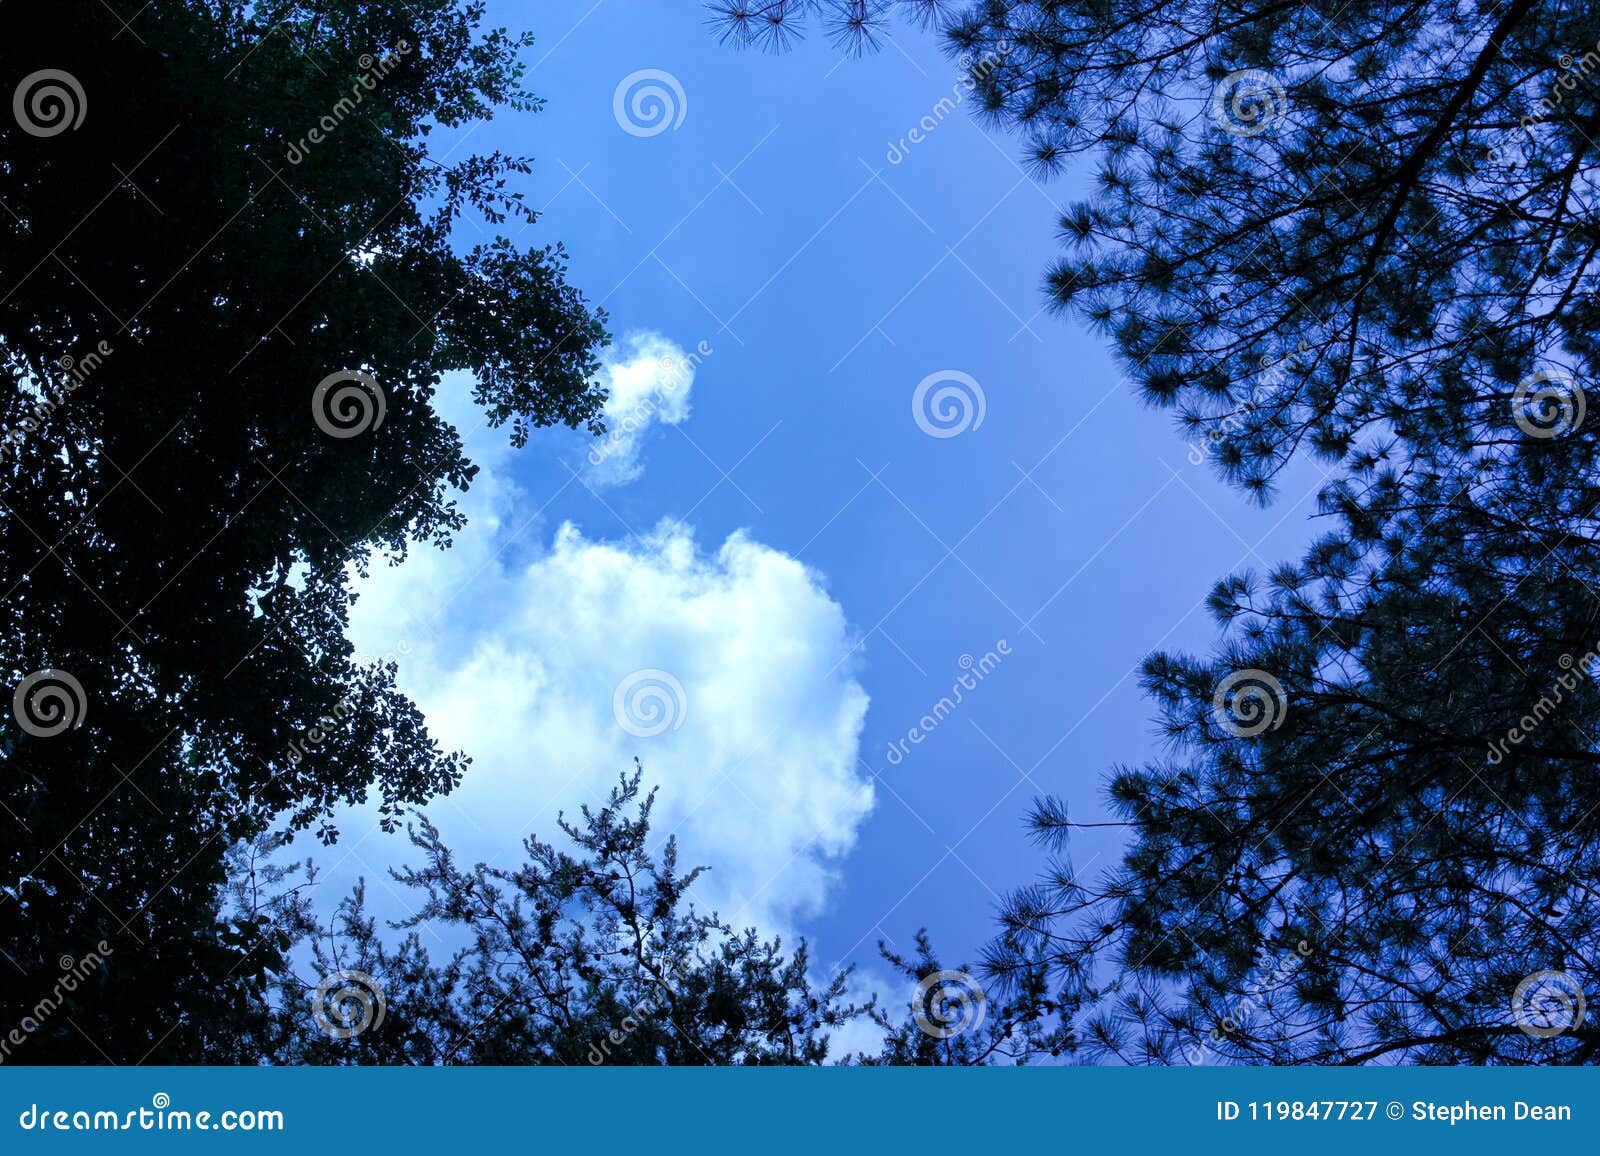 A Canopy of Assorted Trees Partially Hiding a Blue Sky with a Large ...